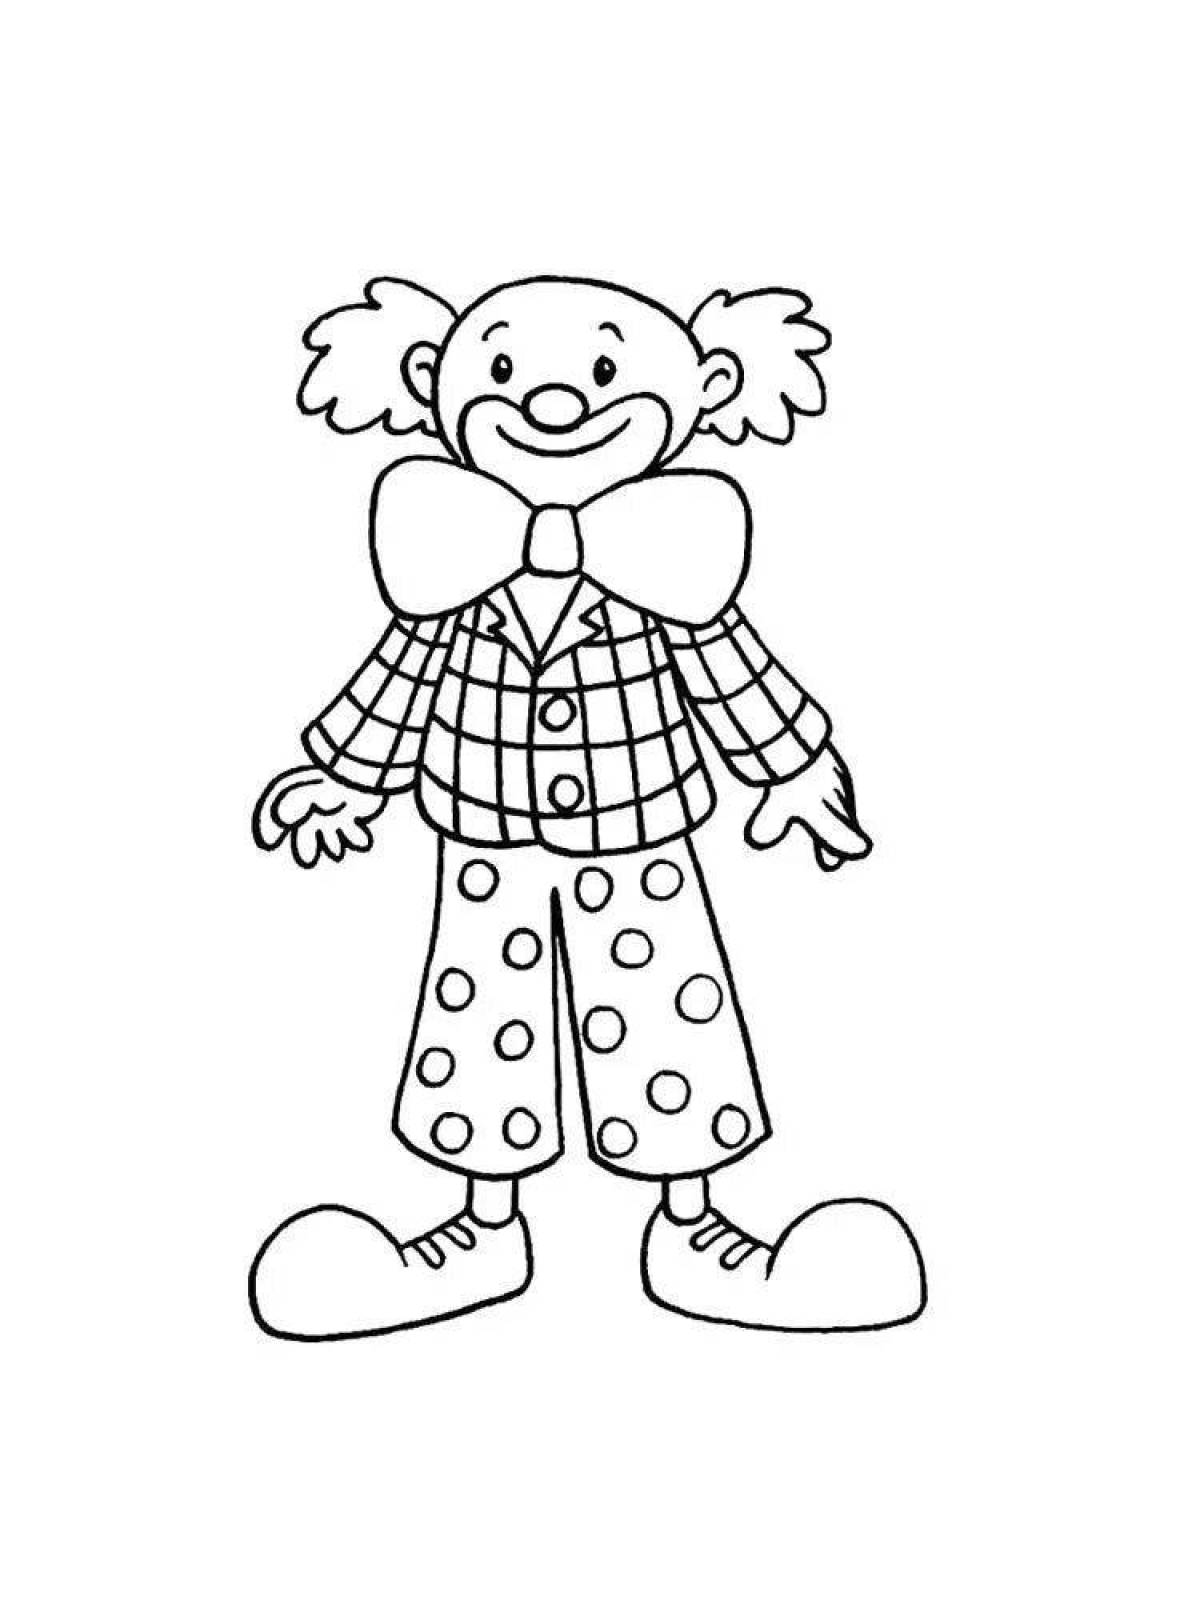 Glorious clown coloring pages for kids